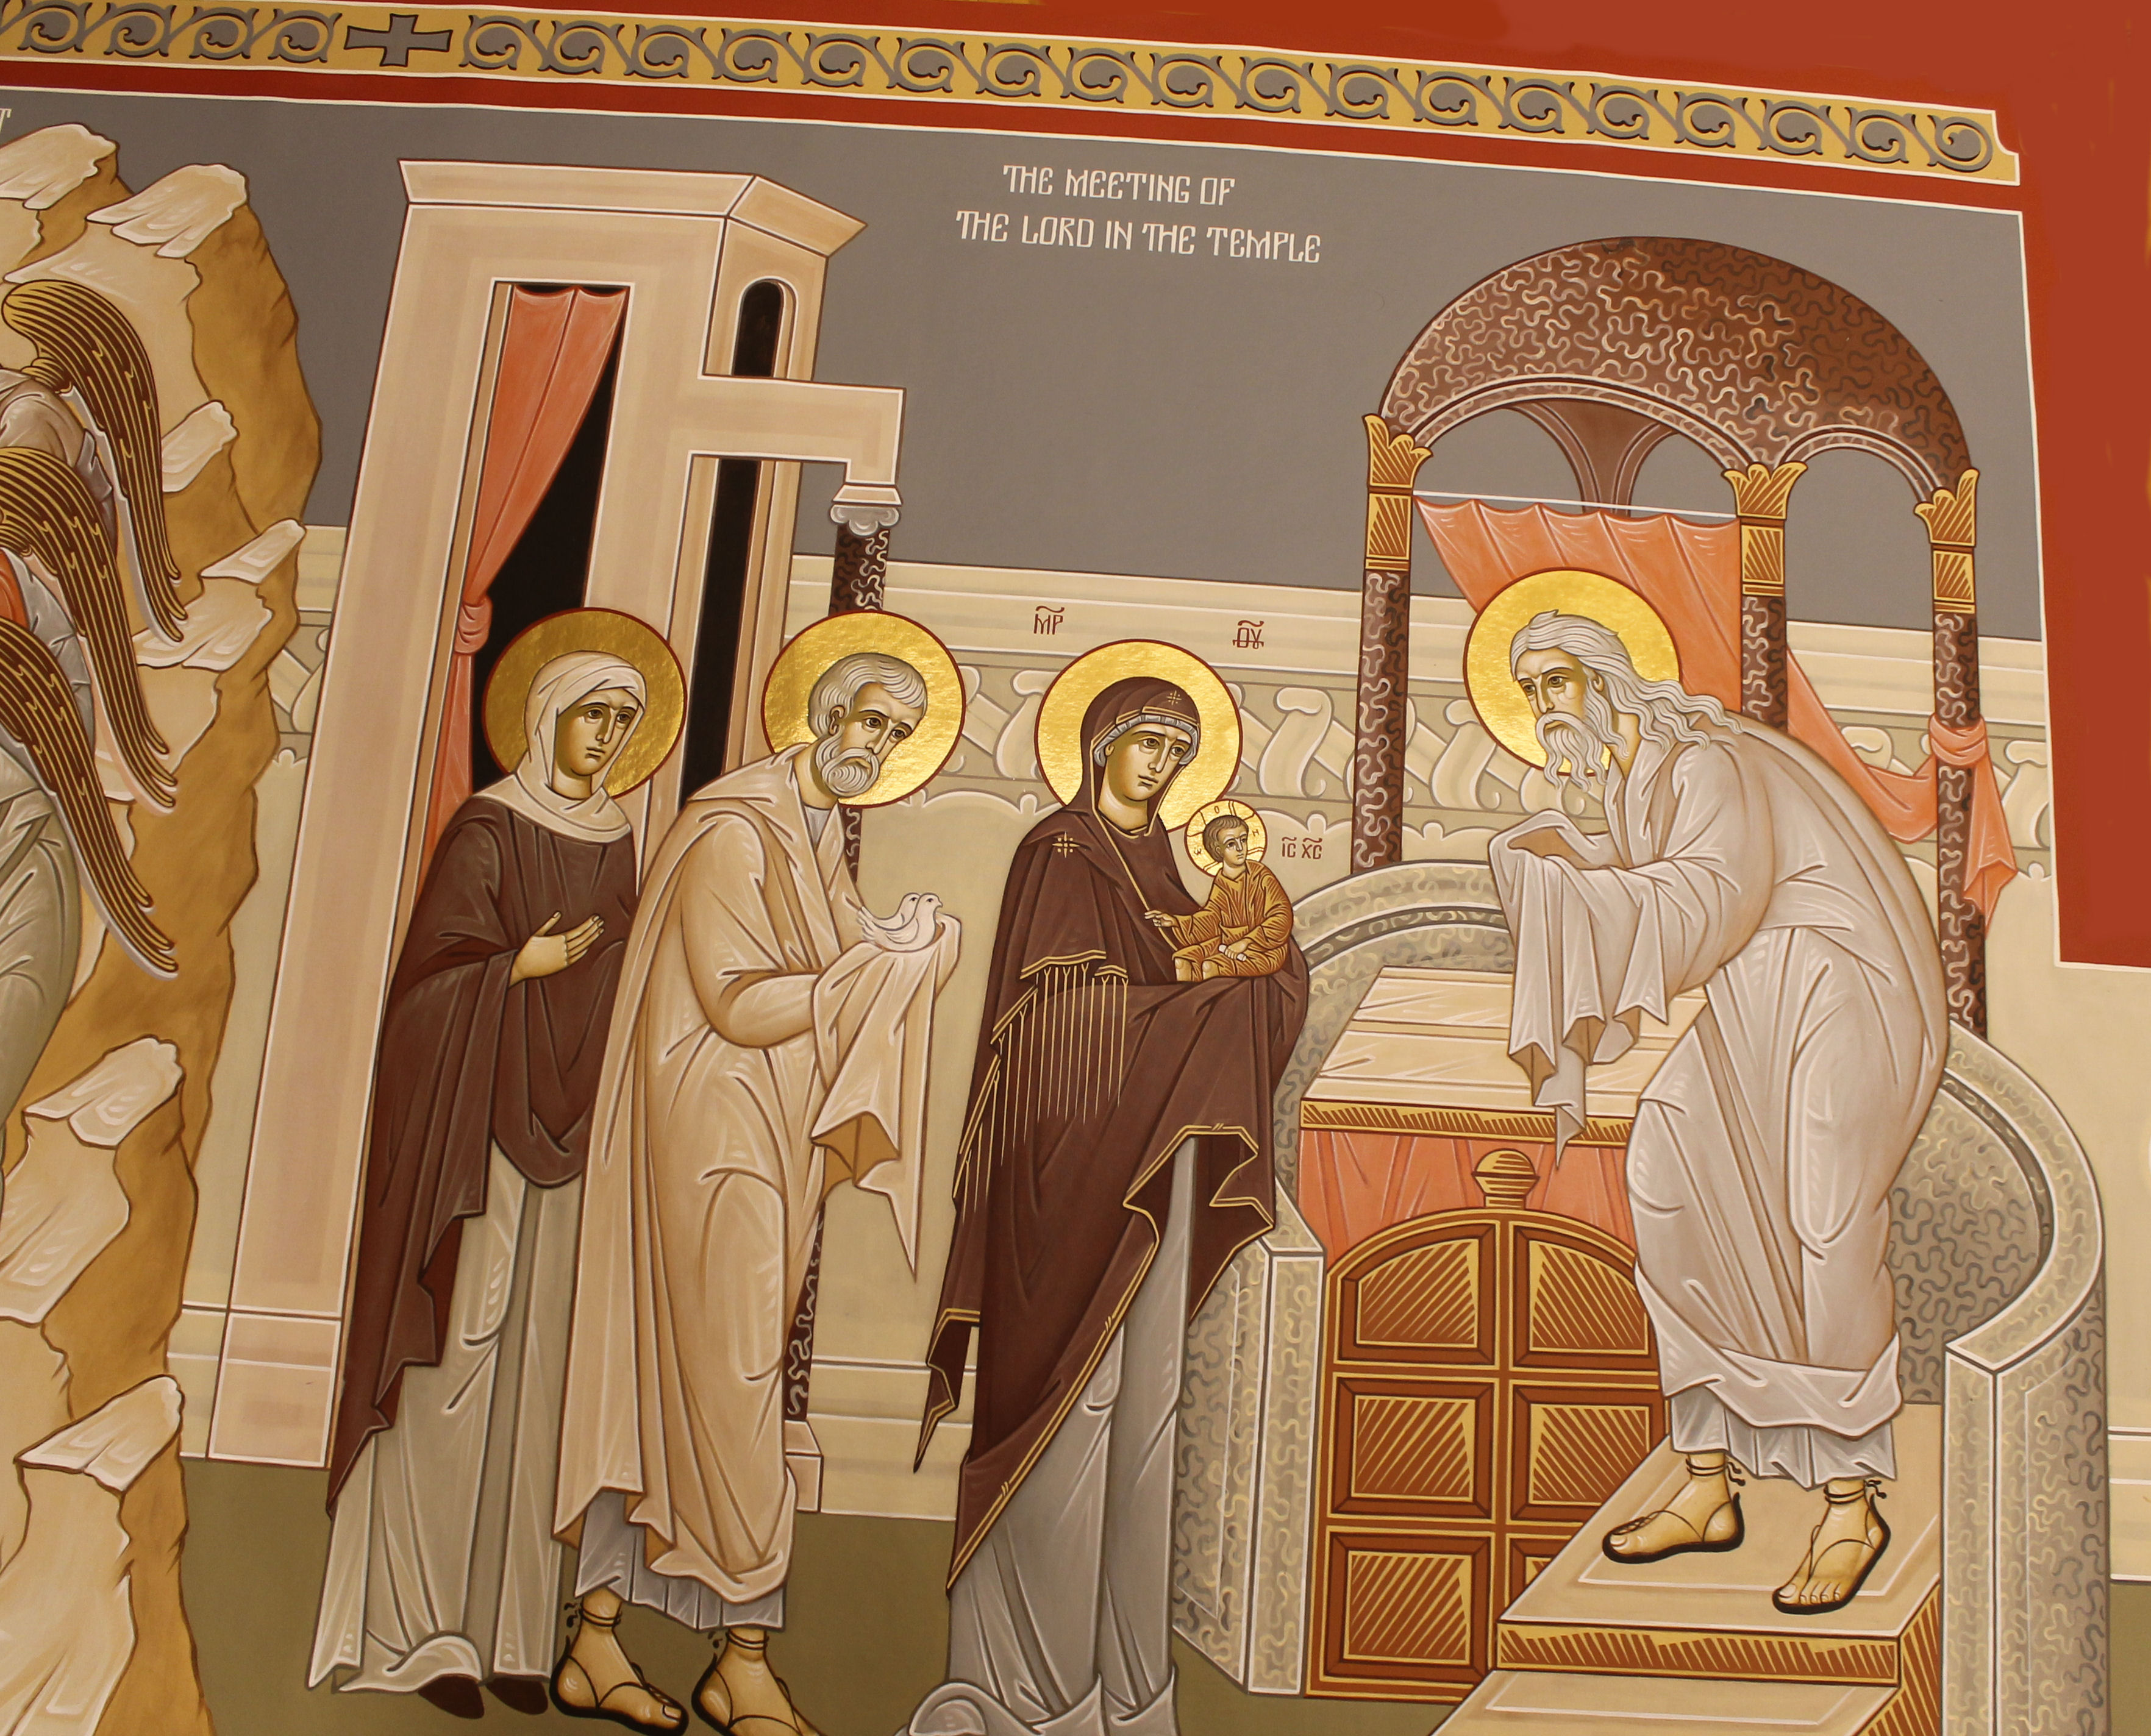 Wall painting the meeting of the Lord in the temple - St. Nicholas Orthodox Church Salem MA by Anna Gouriev-Pokrovsky